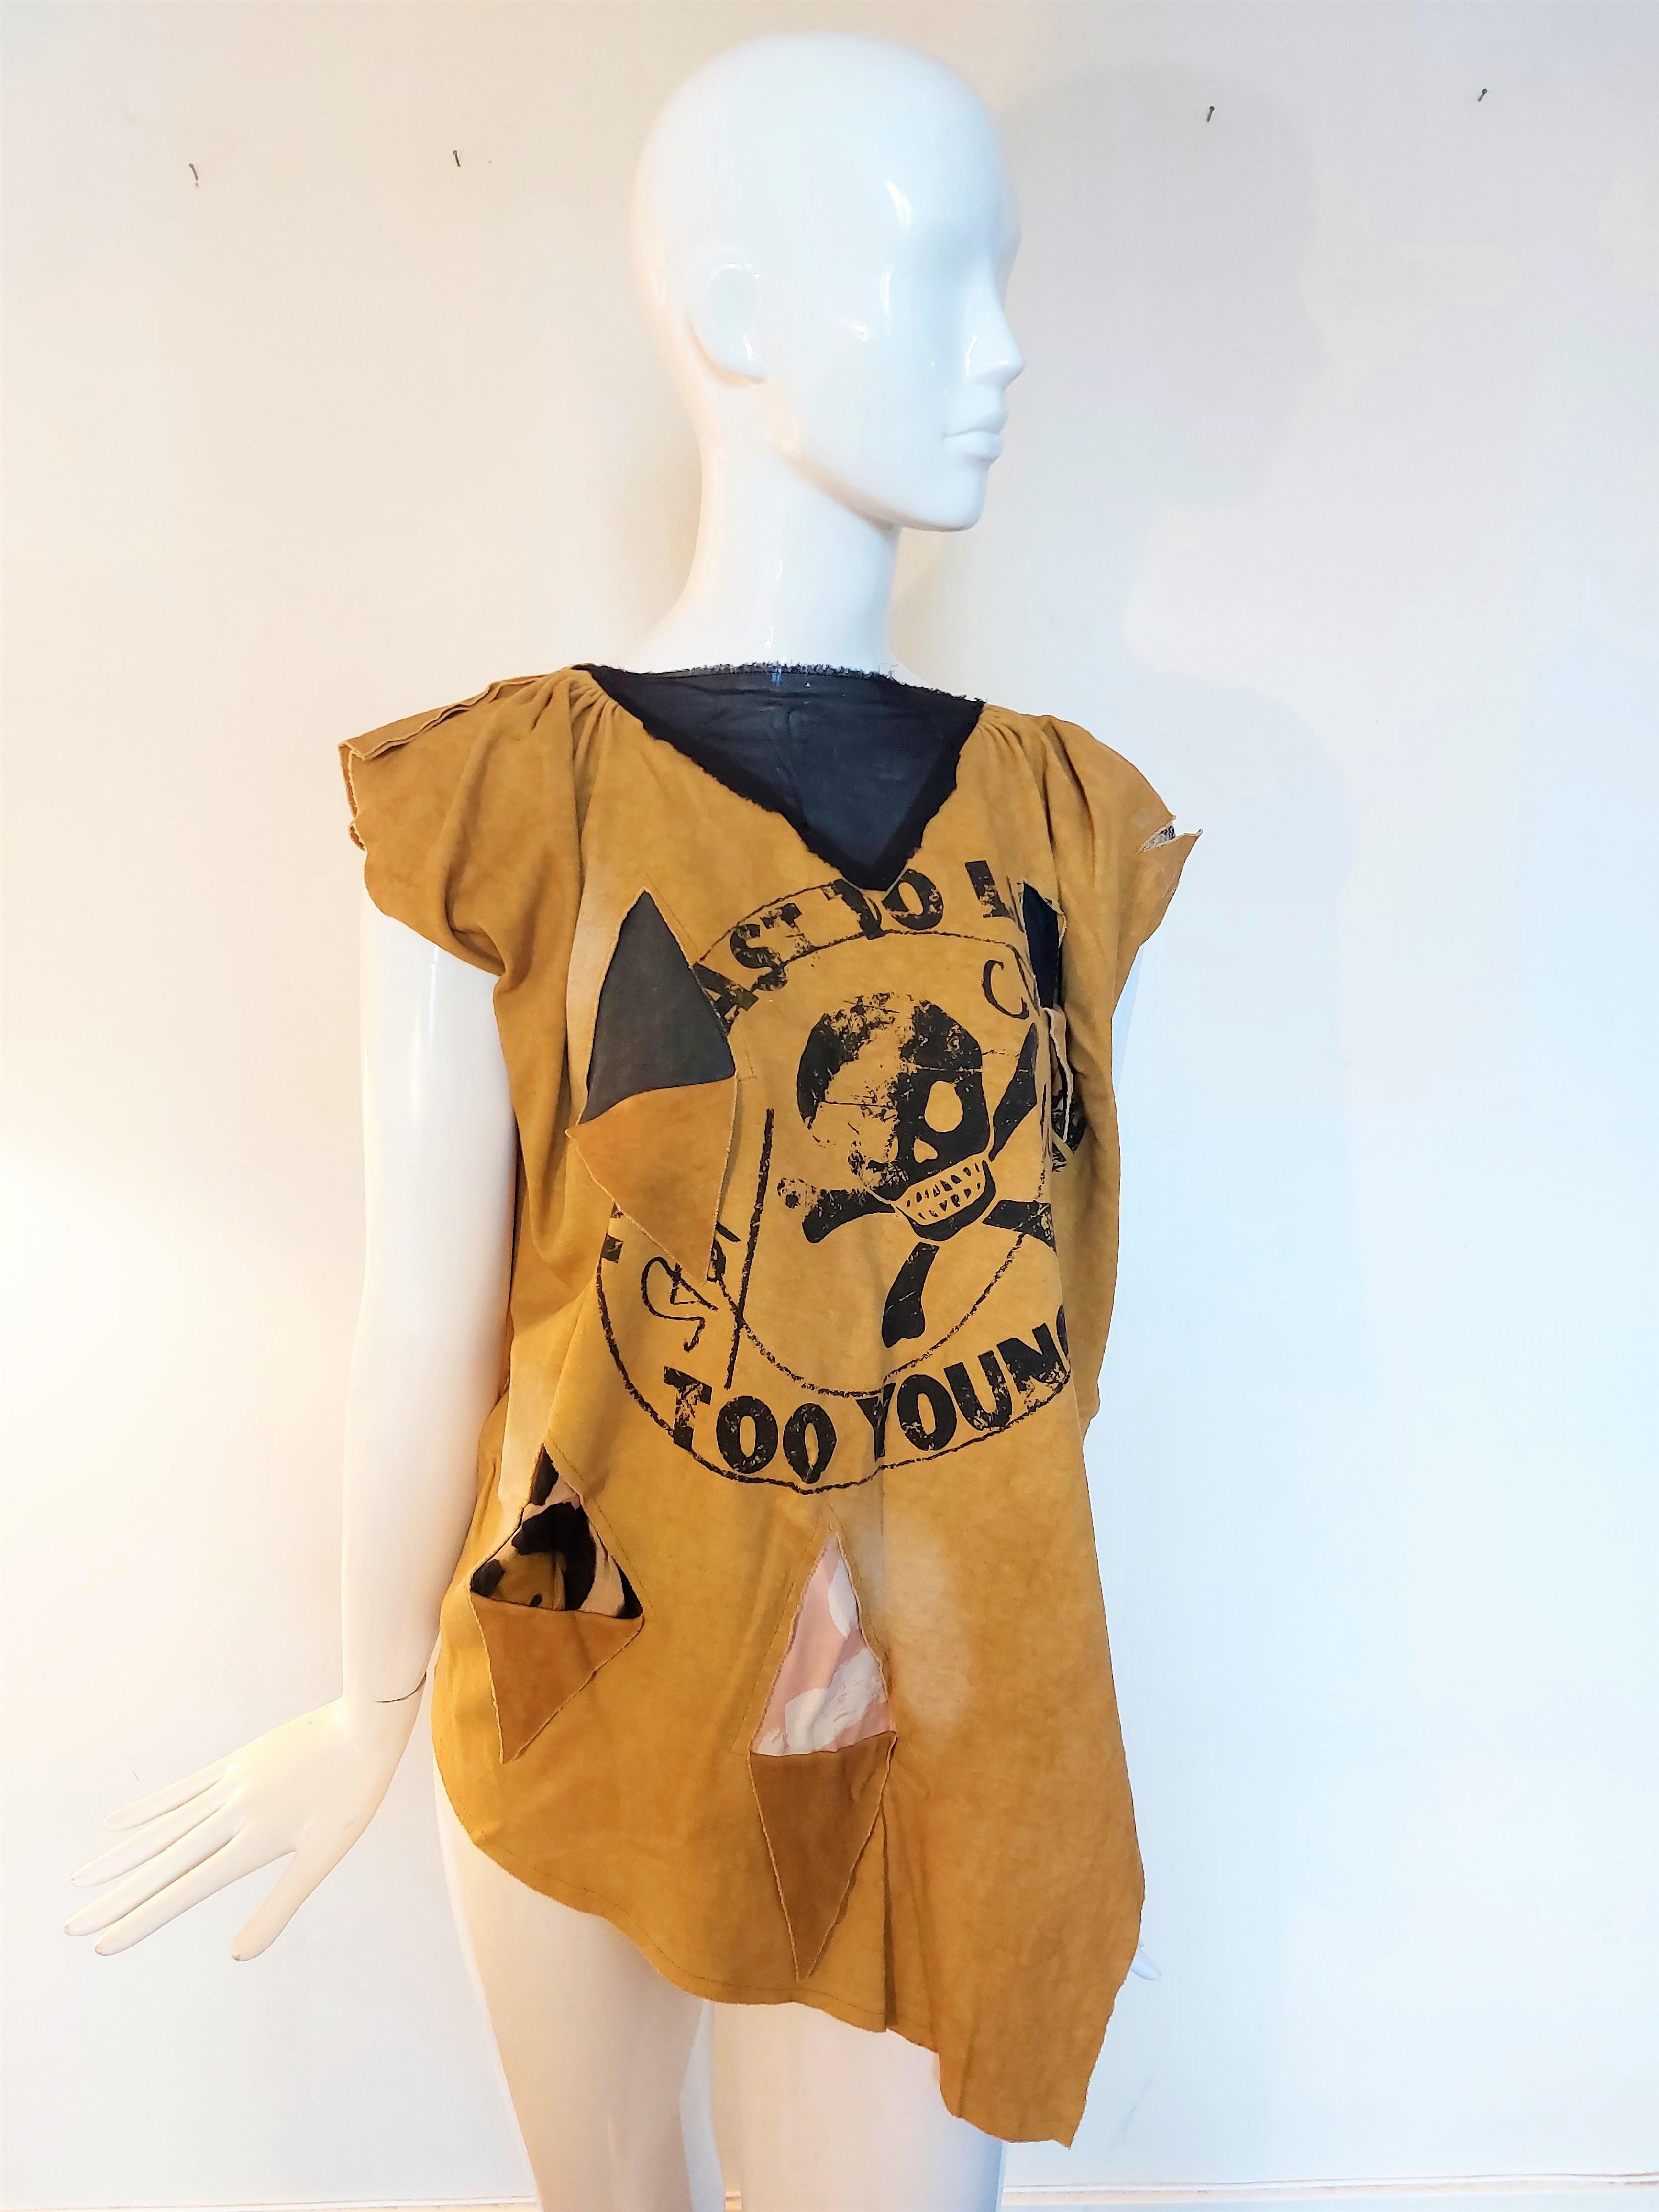 Vivienne Westwood Skull ’Too fast To Live Too Young to Die’ Punk Rock Dress Top 1